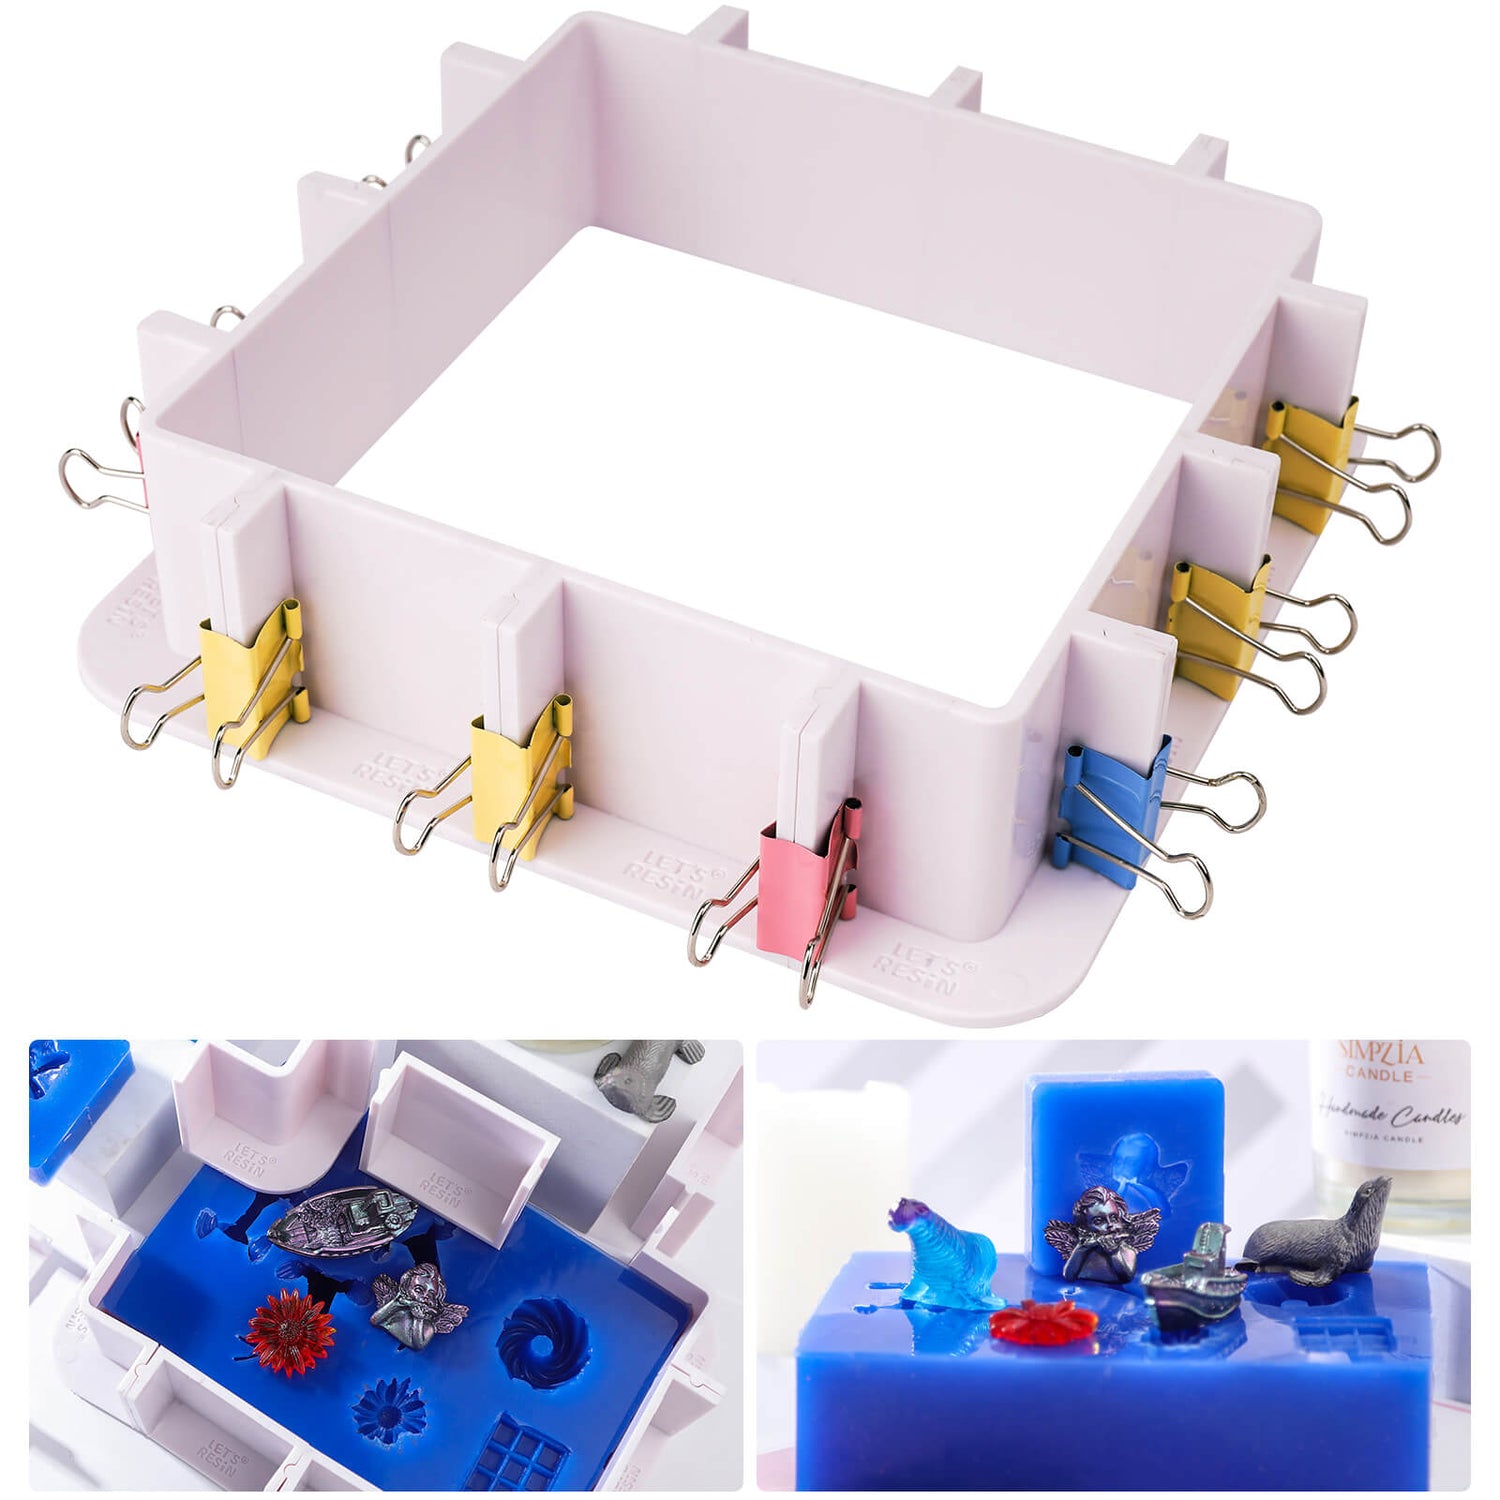 LET'S RESIN Family Mold, Silicone Resin Molds, Good Ideas to